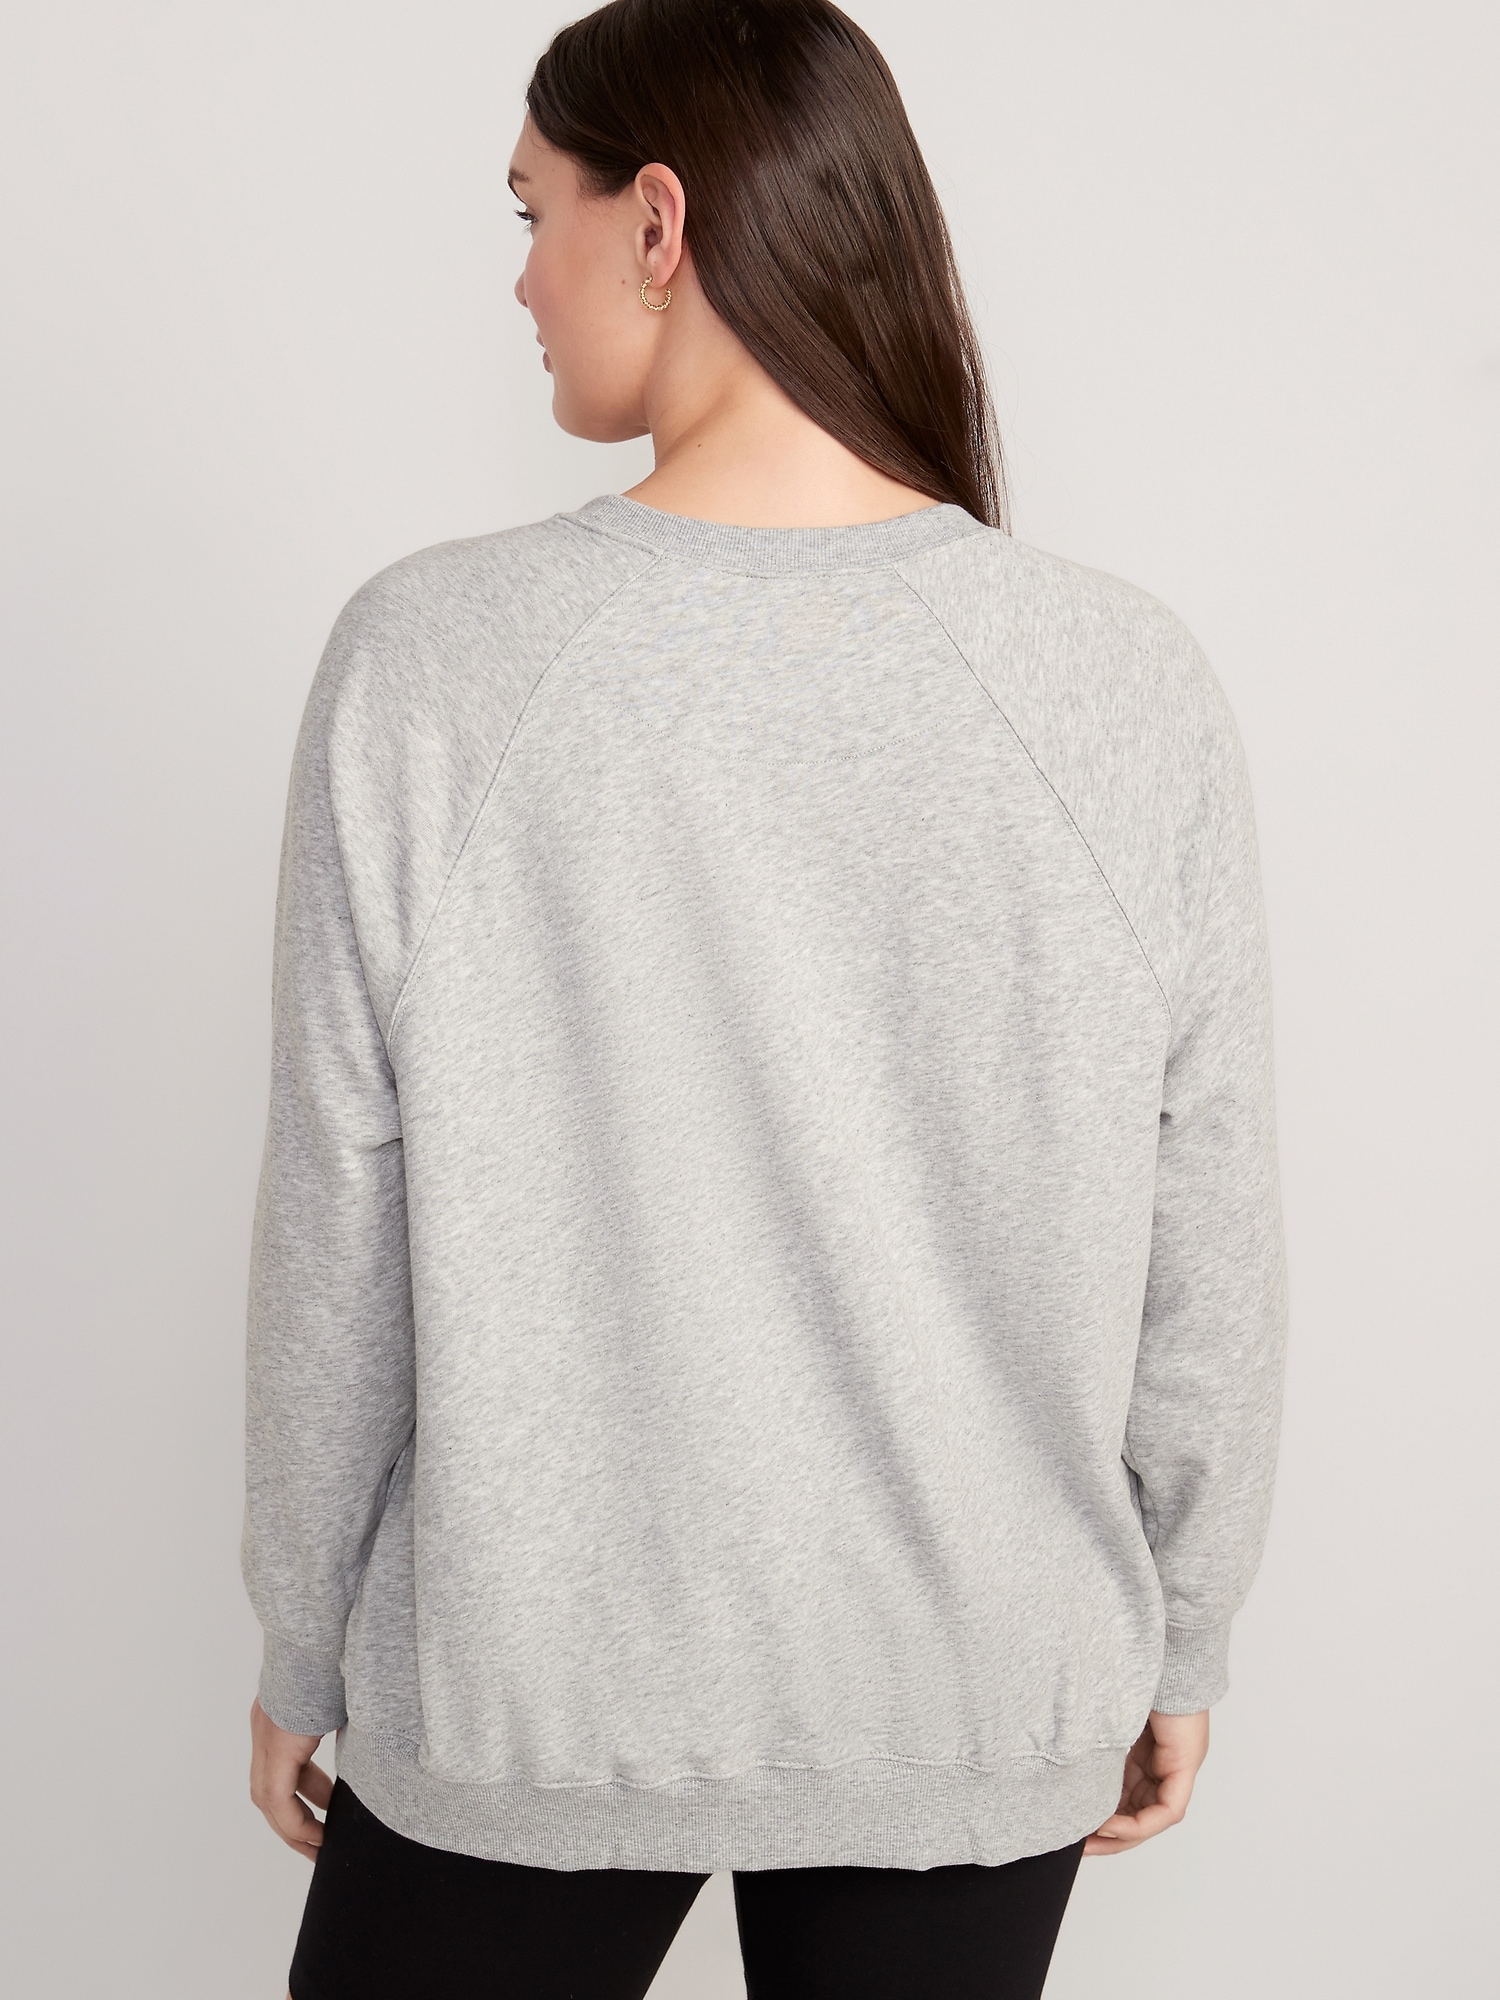 Oversized French Terry Tunic Old | Women Sweatshirt Navy for